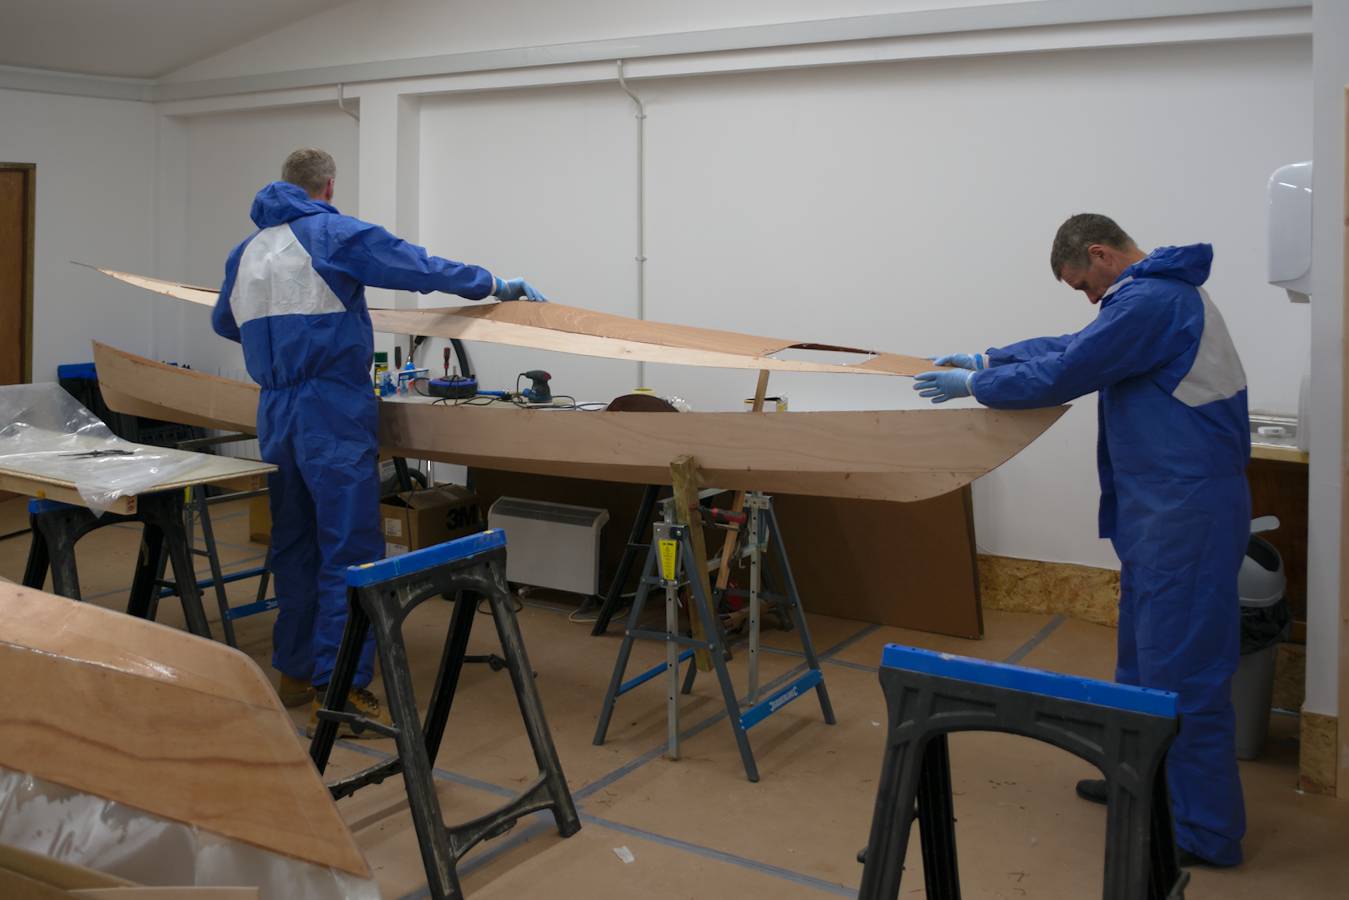 Boatbuilding course in our fully-equipped workshop at Fyne Boat Kits